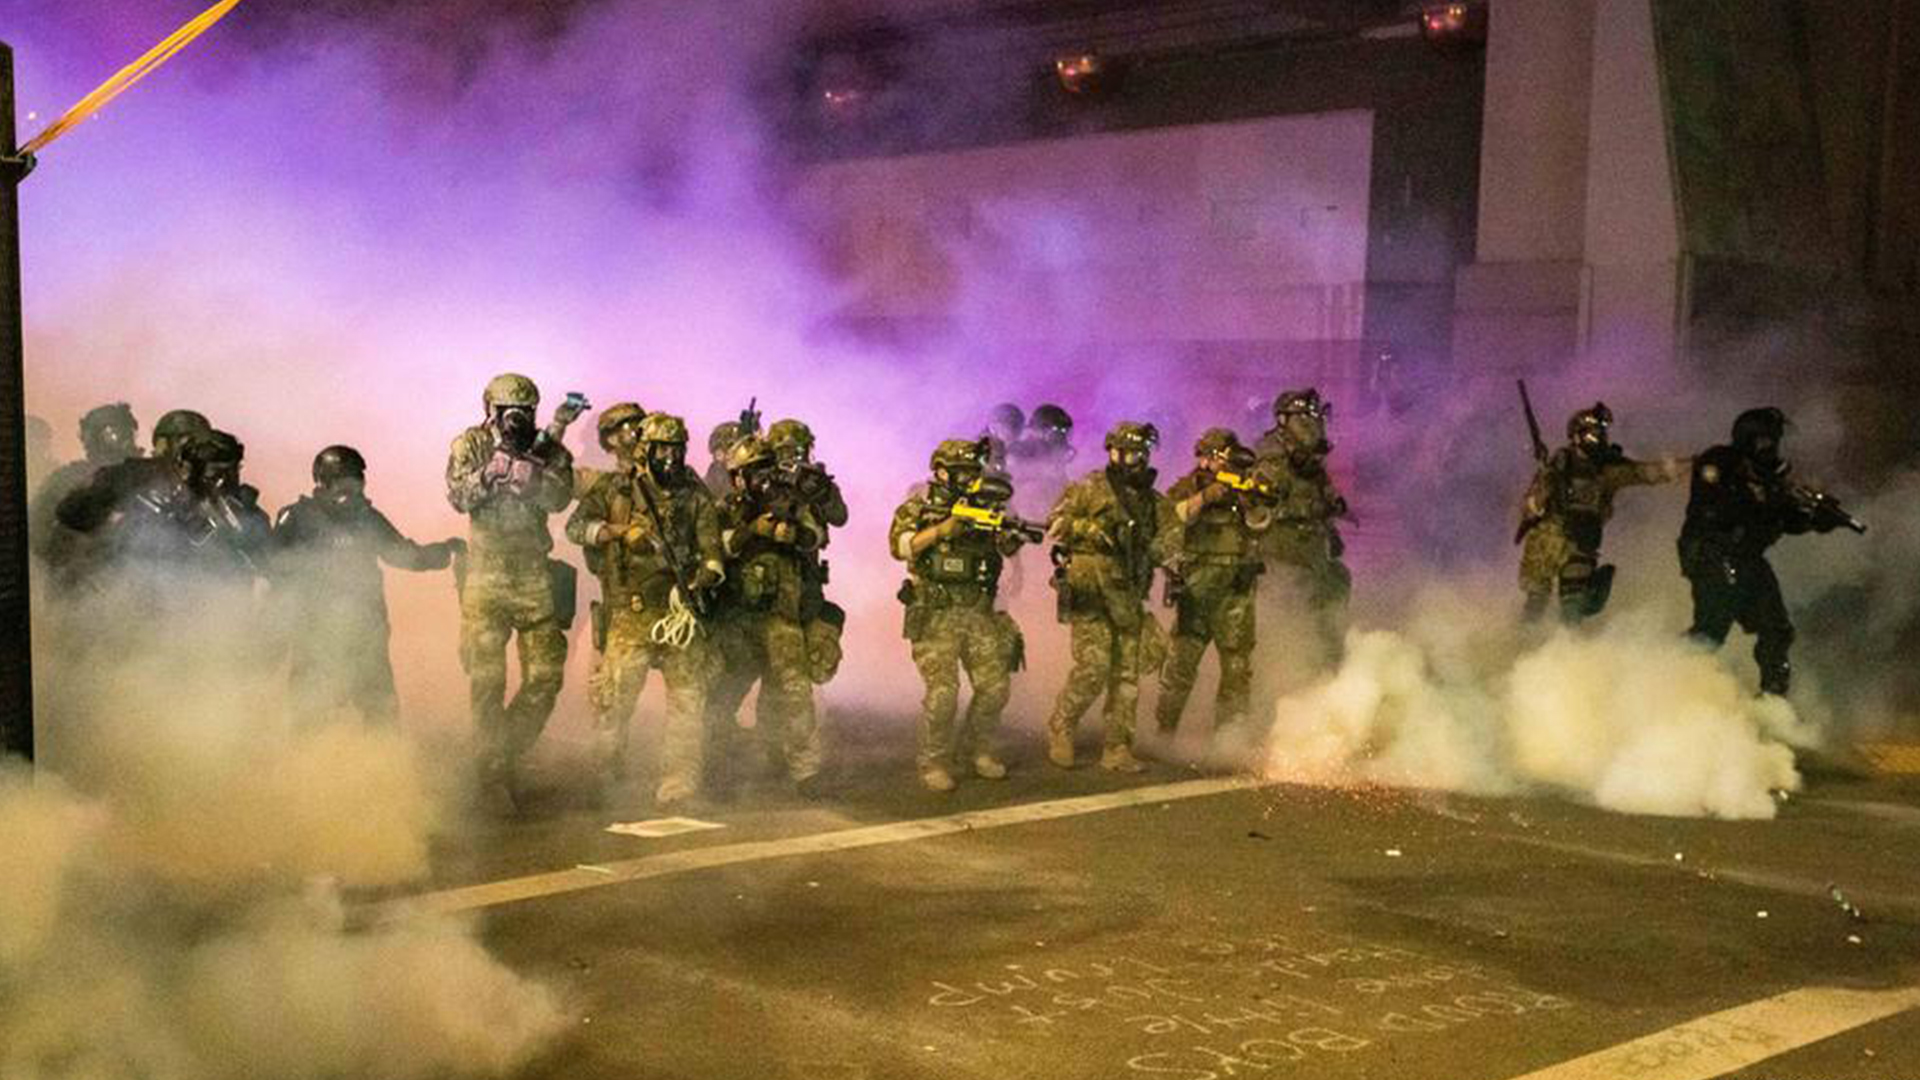 US federal officers use Tear Gas in Portland